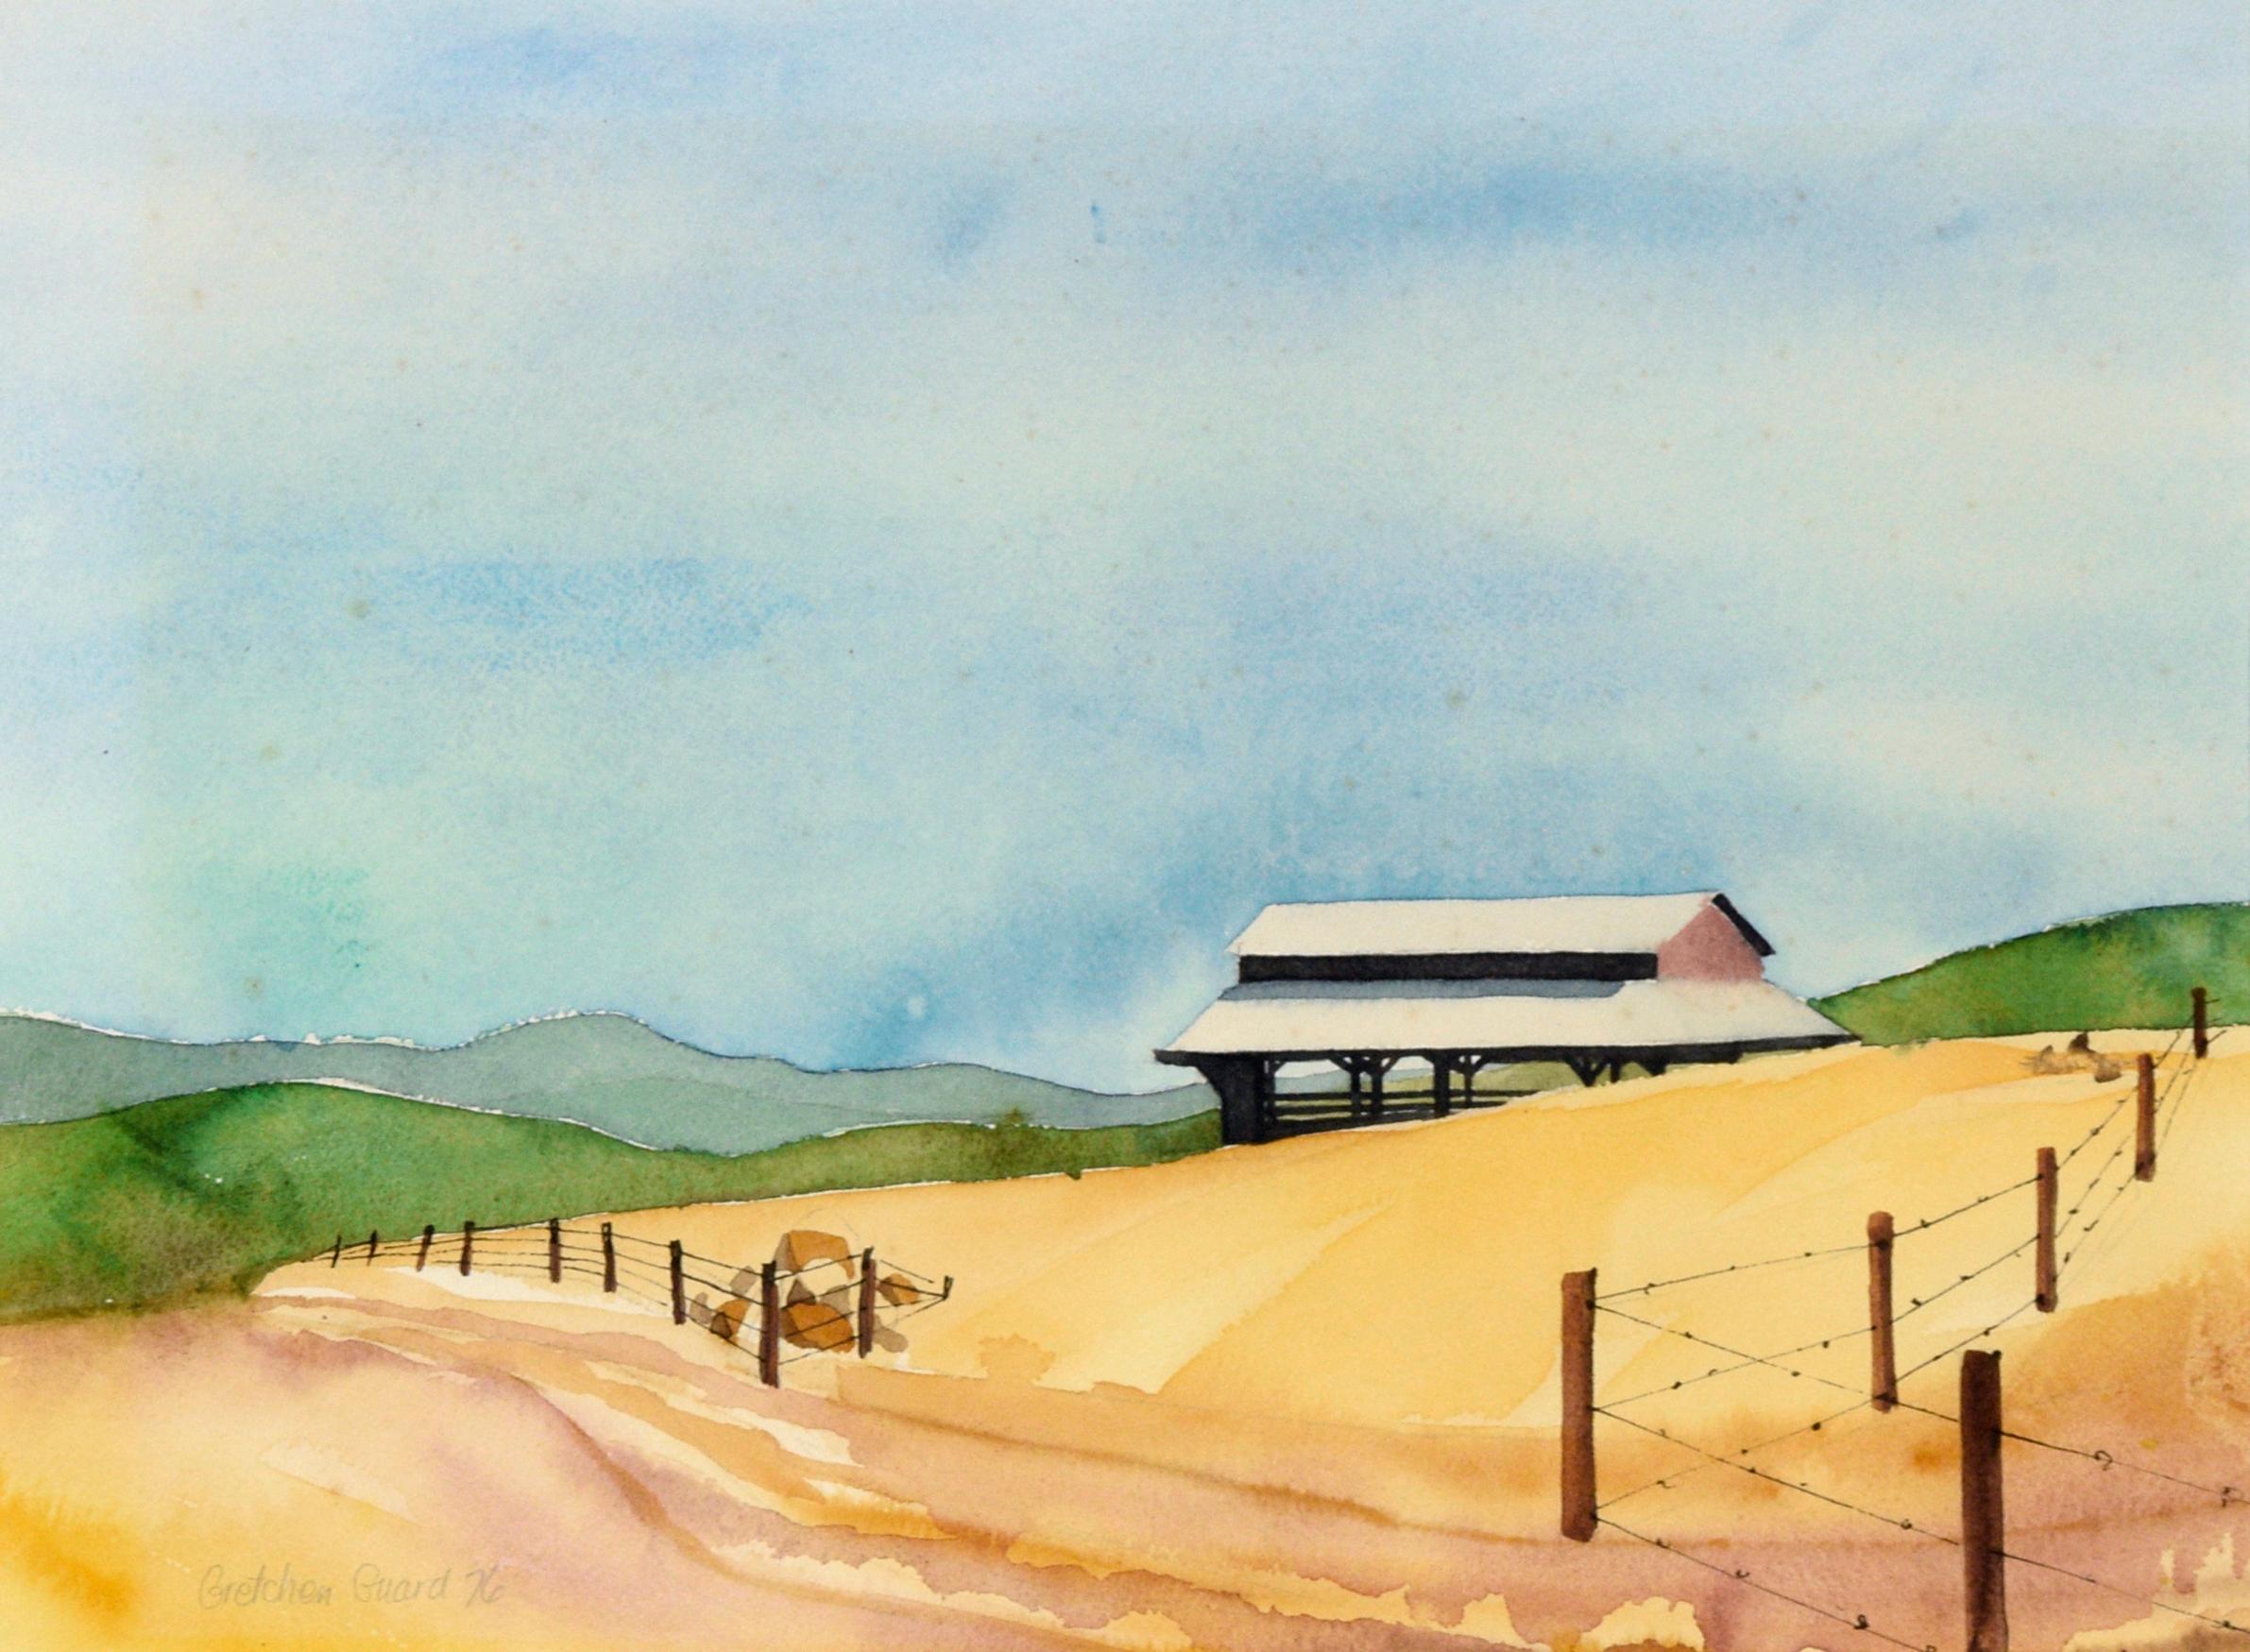 Barn in the Rolling Hills, 1970's Landscape Watercolor on Paper - Art by Gretchen Guard